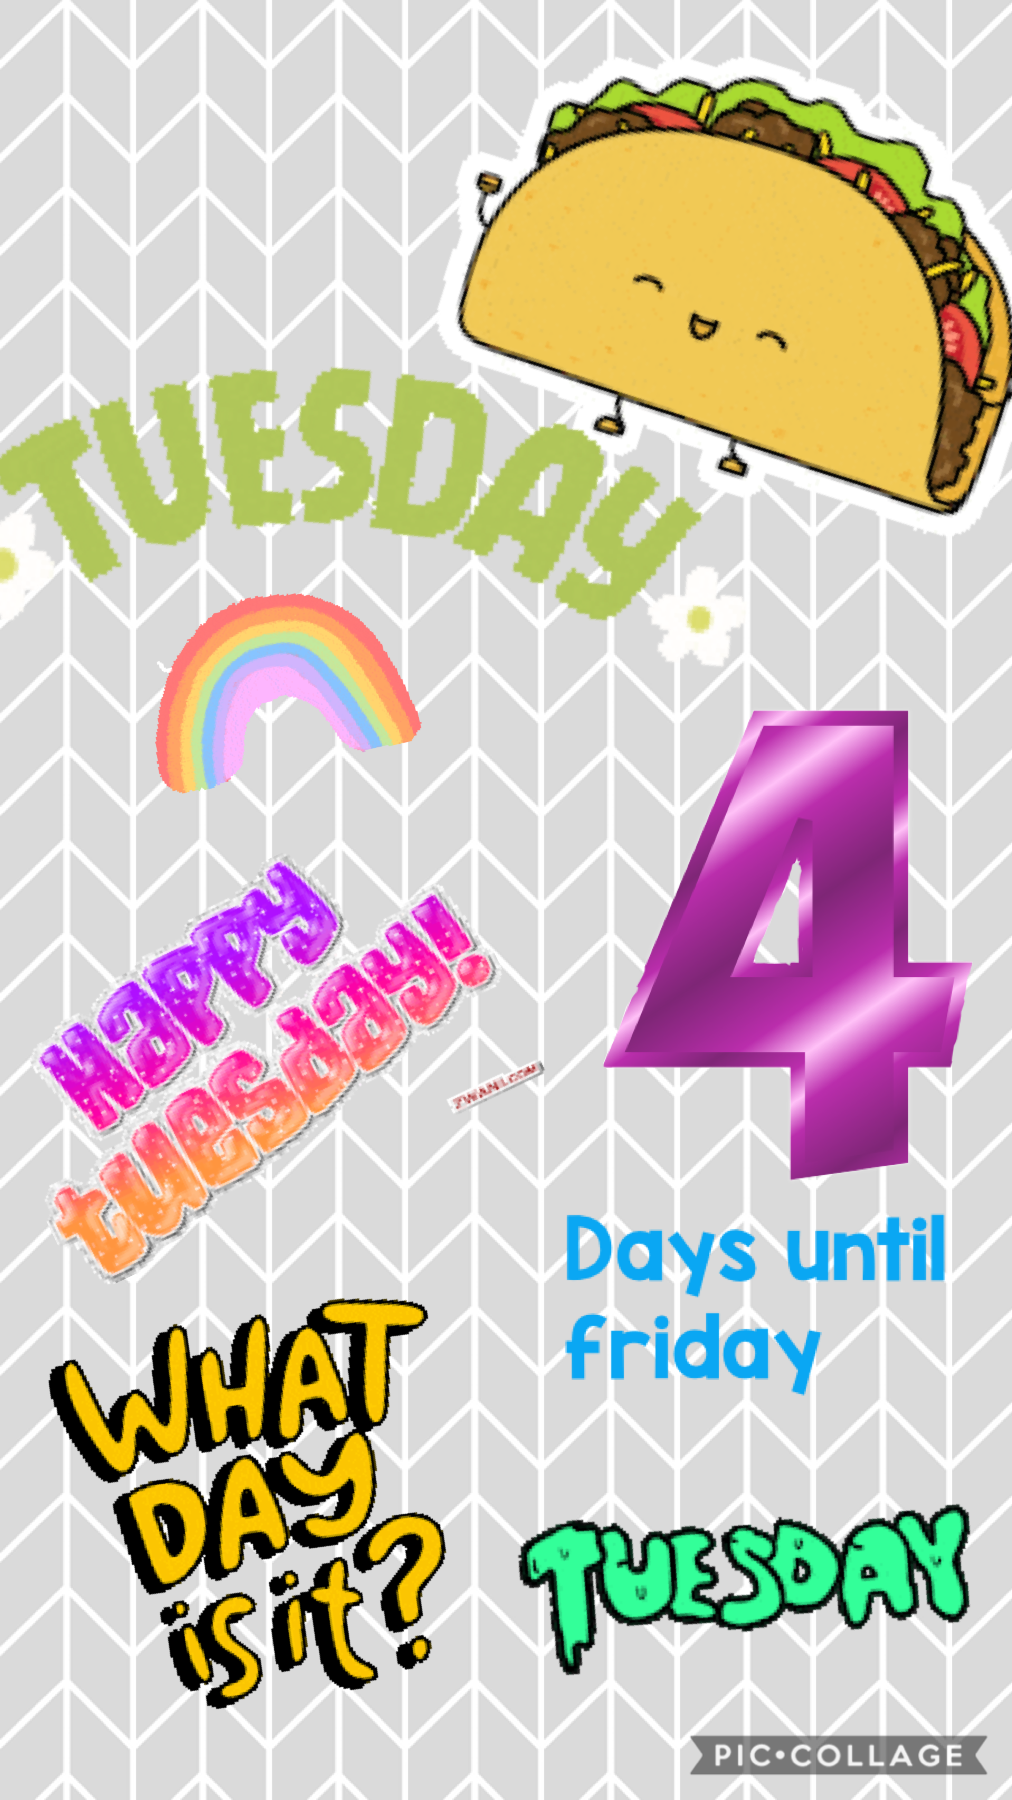 It’s Tuesday!!! That means 4 days til Friday!!!